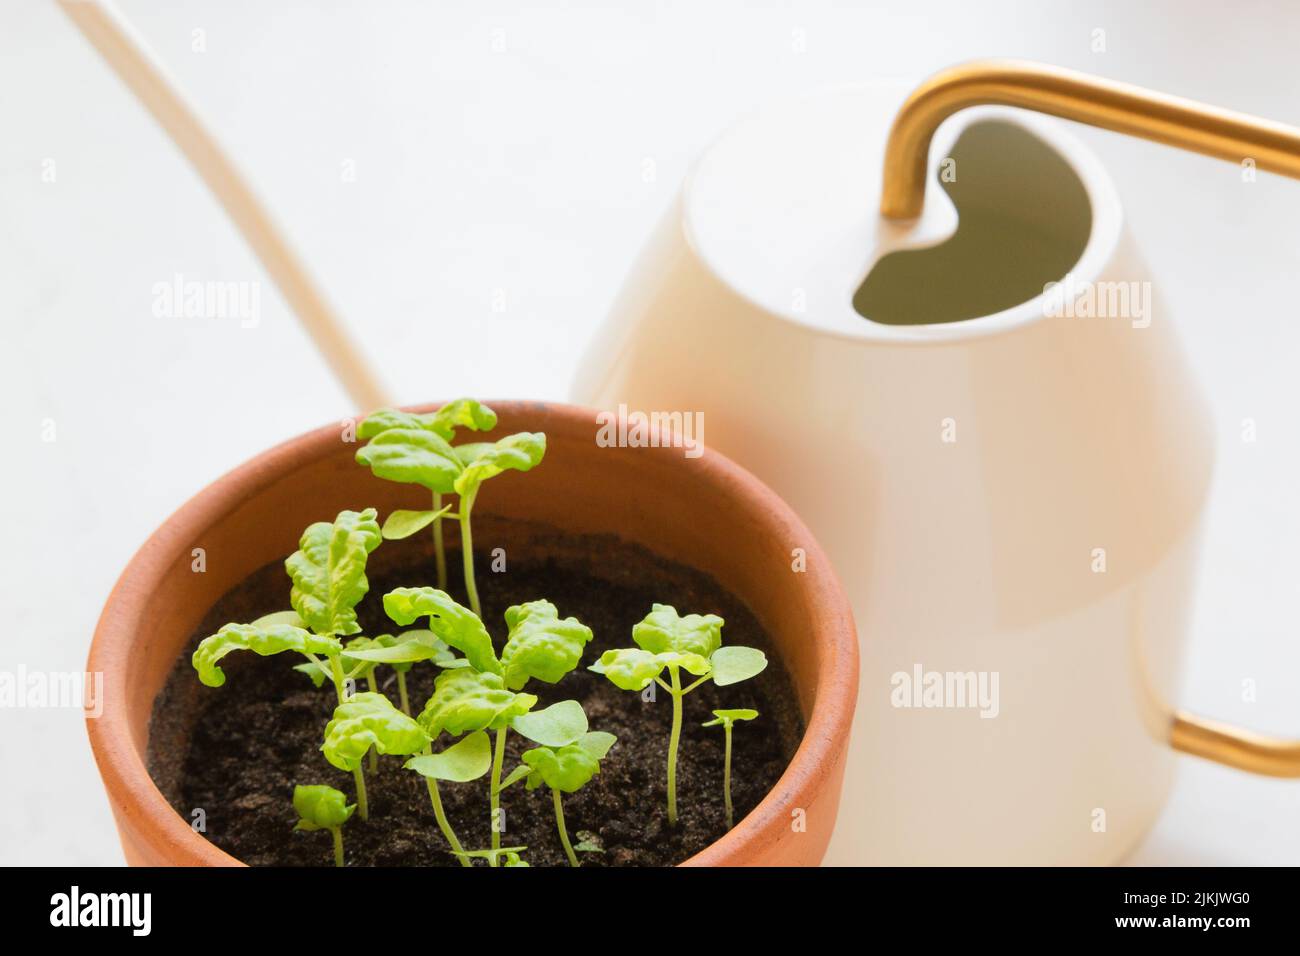 https://c8.alamy.com/comp/2JKJWG0/fresh-young-basil-ocimum-basilicum-sprouts-in-a-terracotta-pot-and-a-watering-can-against-a-white-background-2JKJWG0.jpg